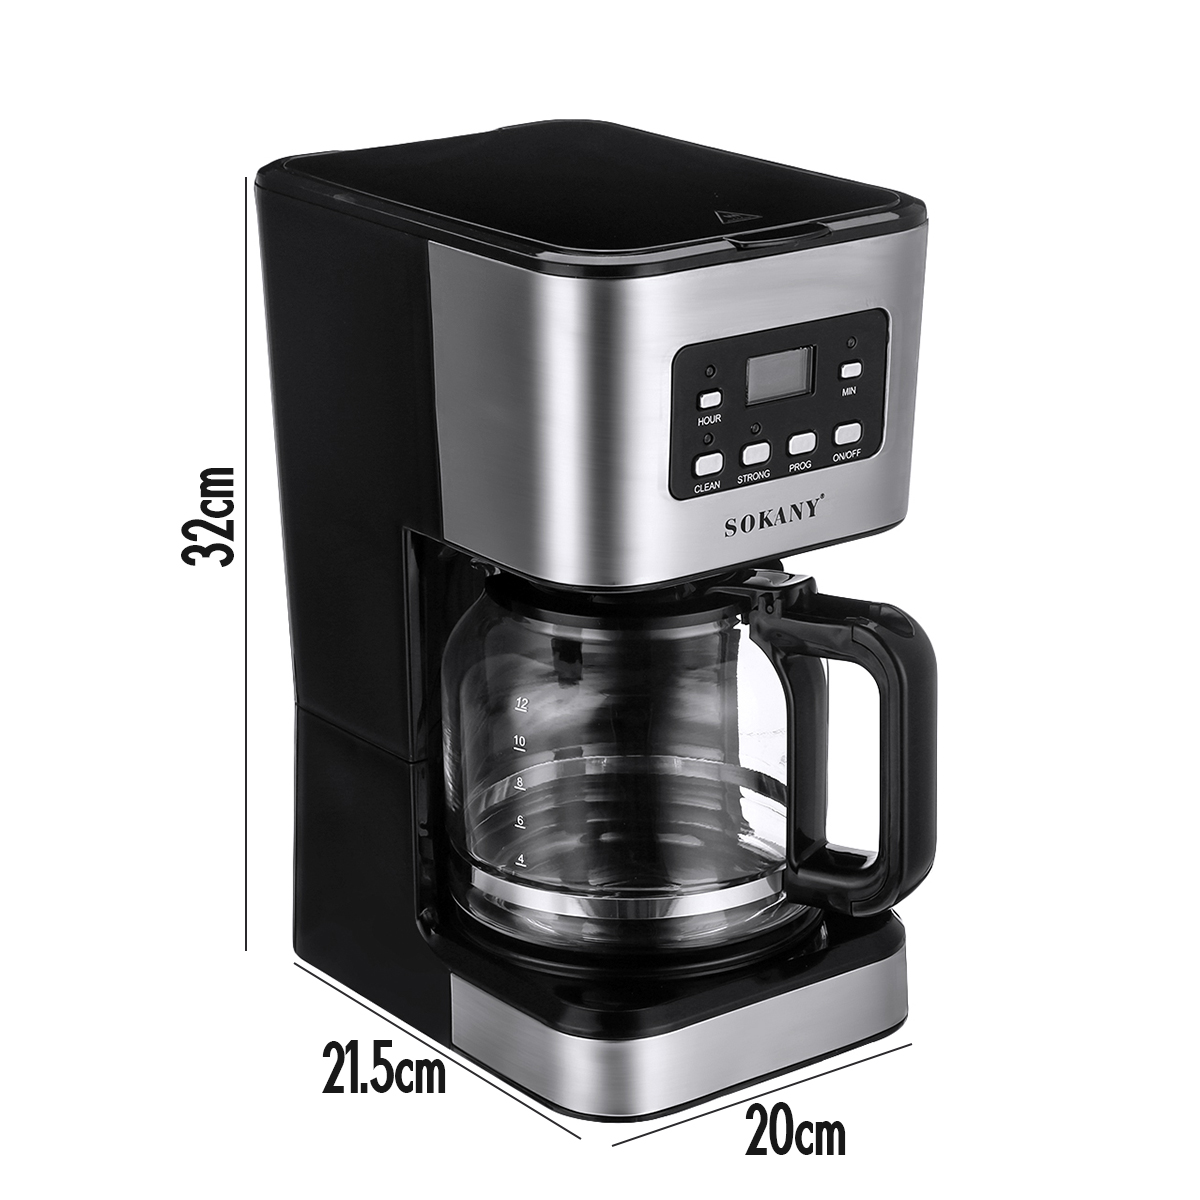 220V Coffee Maker 12 Cups 1.5L Semi-Automatic Espresso Making Machine Stainless Steel 41